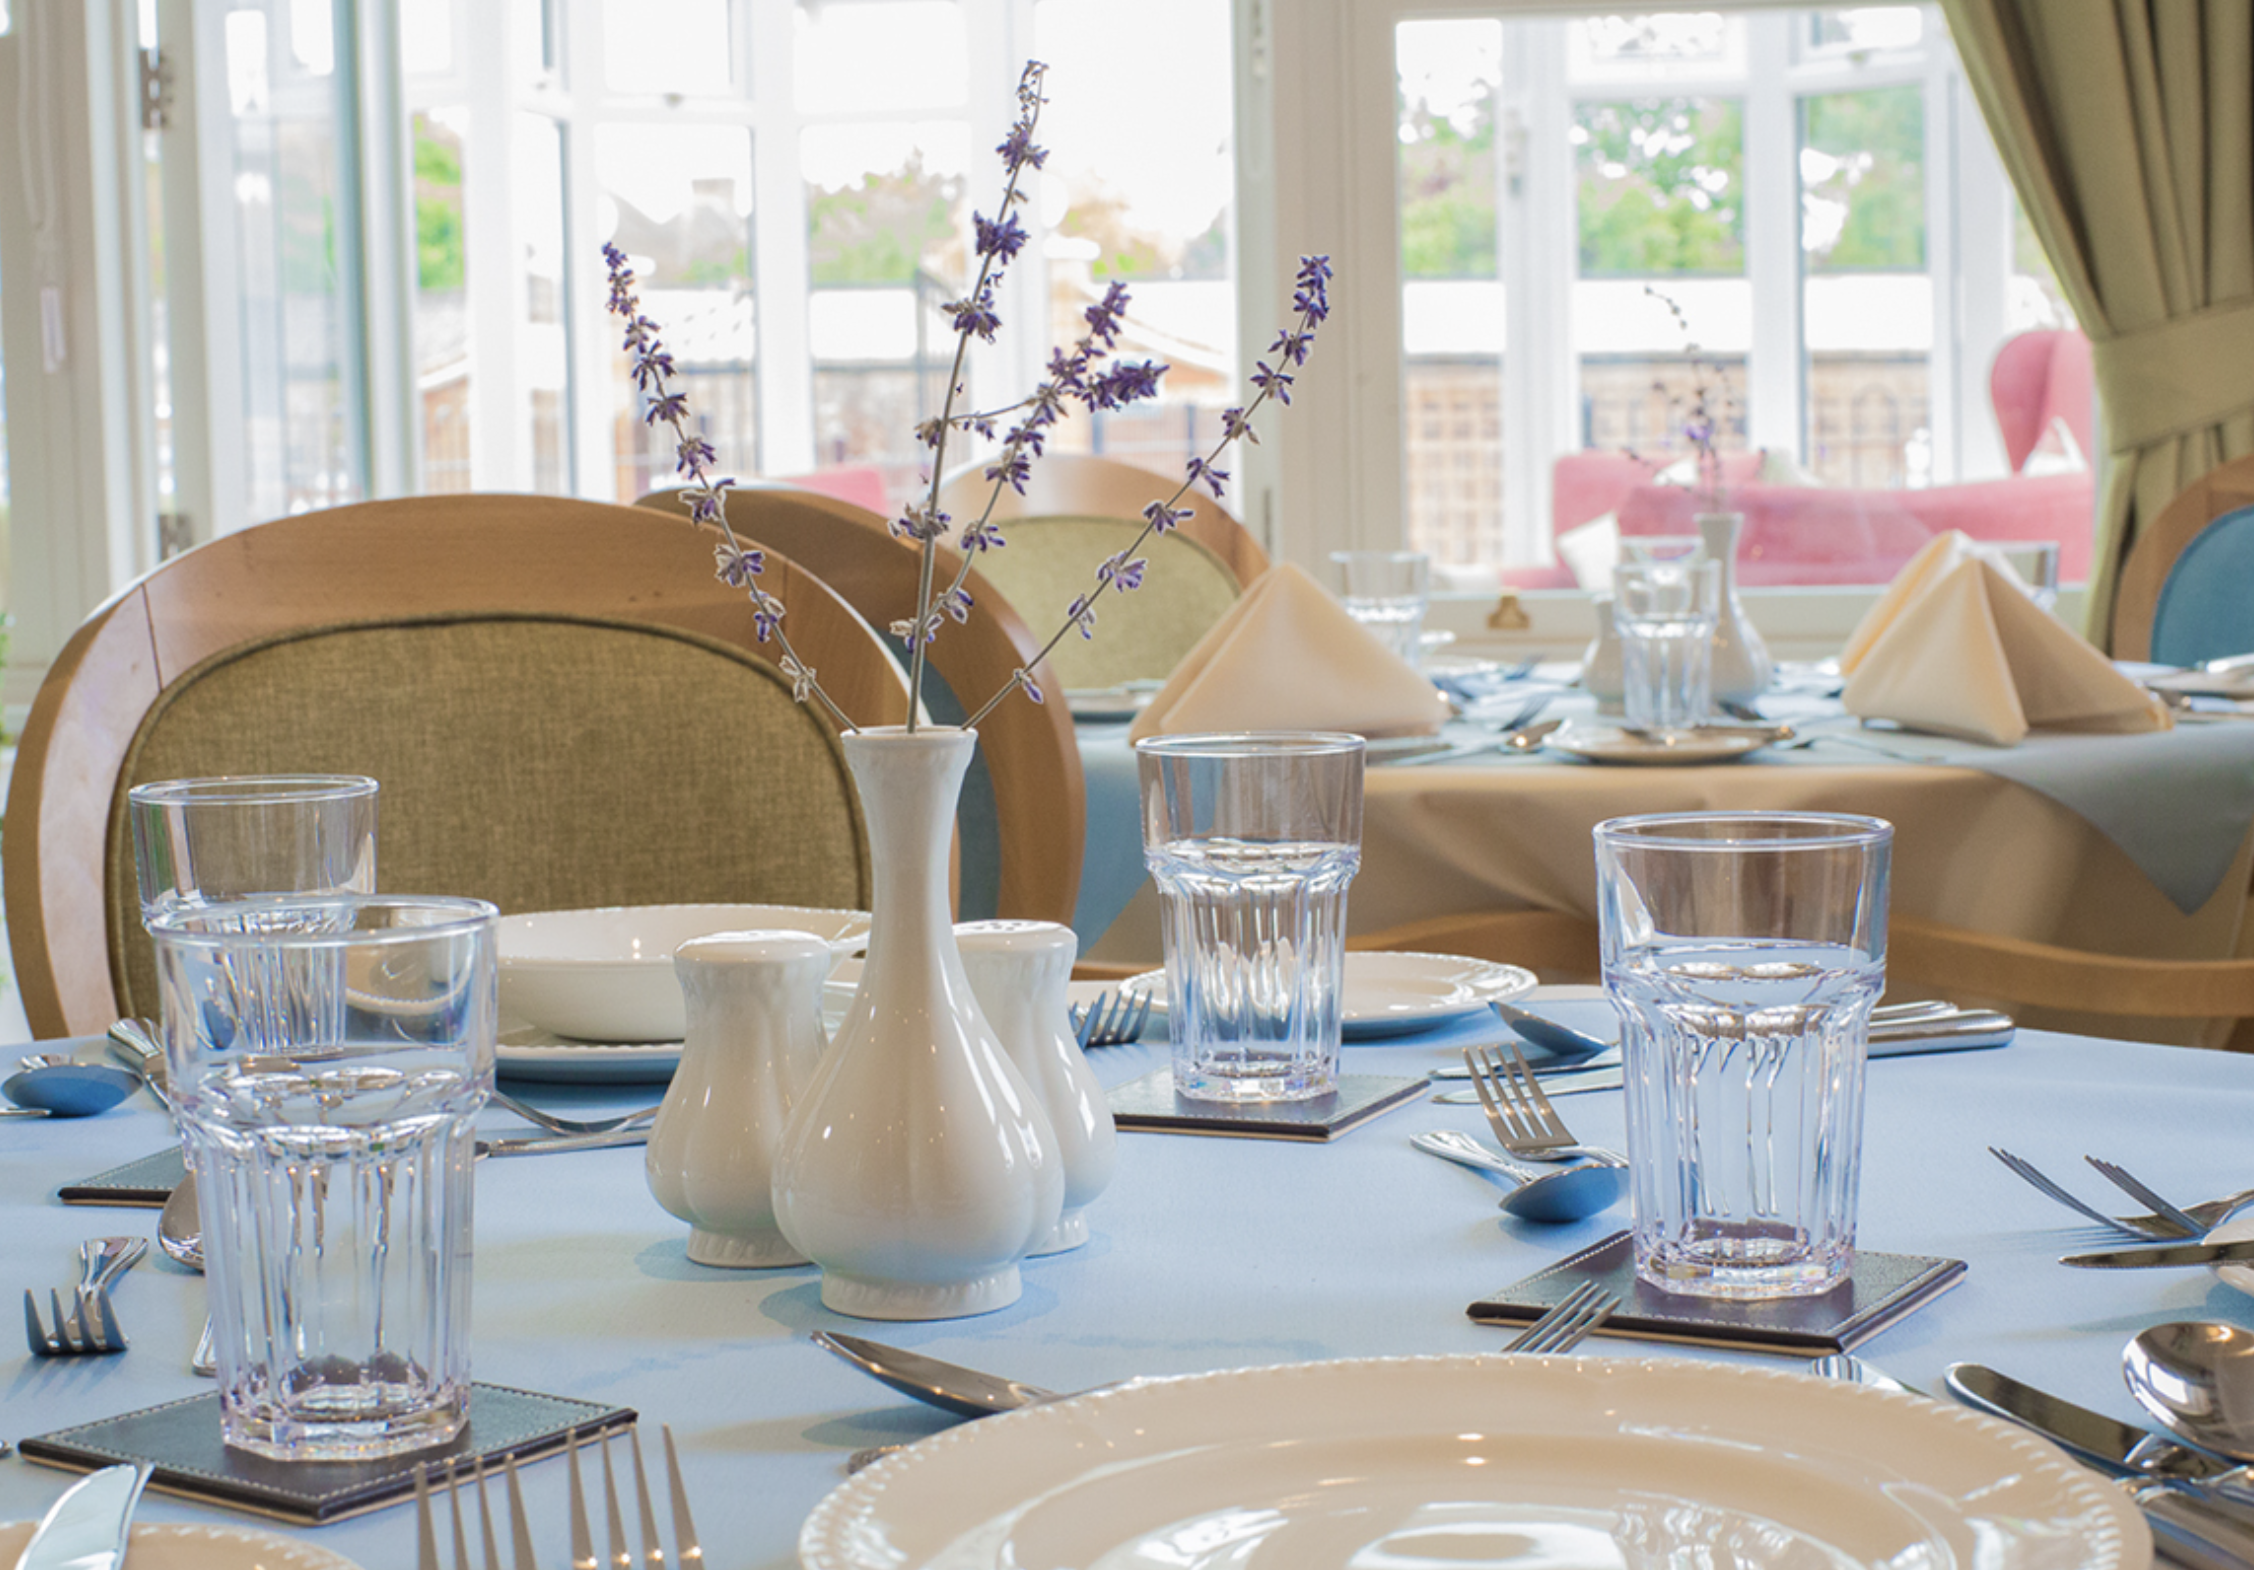 Dining area of Kingfisher care home in Cheshunt, Hertfordshire